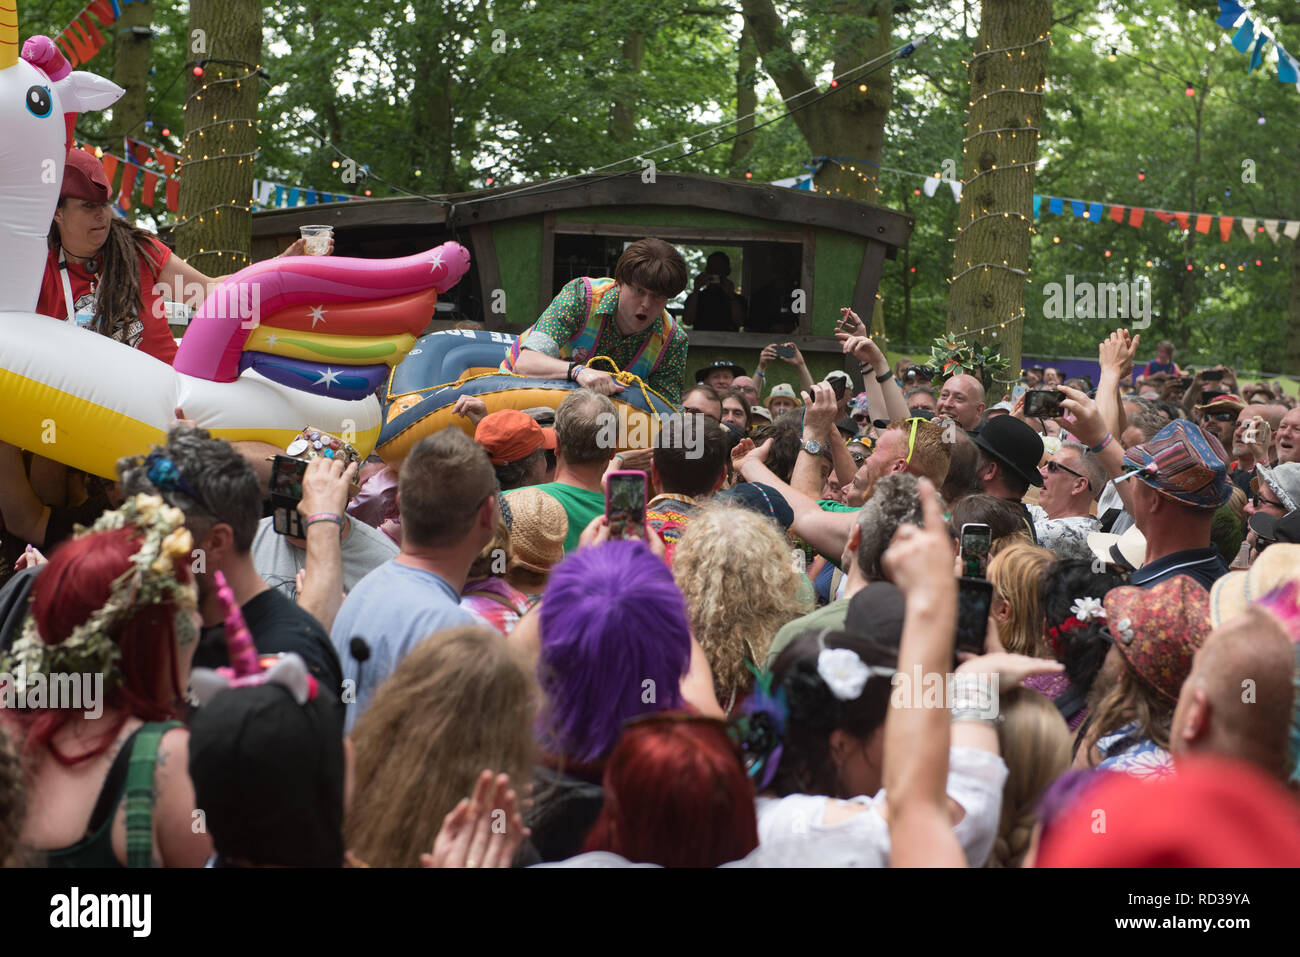 Scott Doonican crowd surfing in a rubber dinghy at the Bearded Theory festival Stock Photo